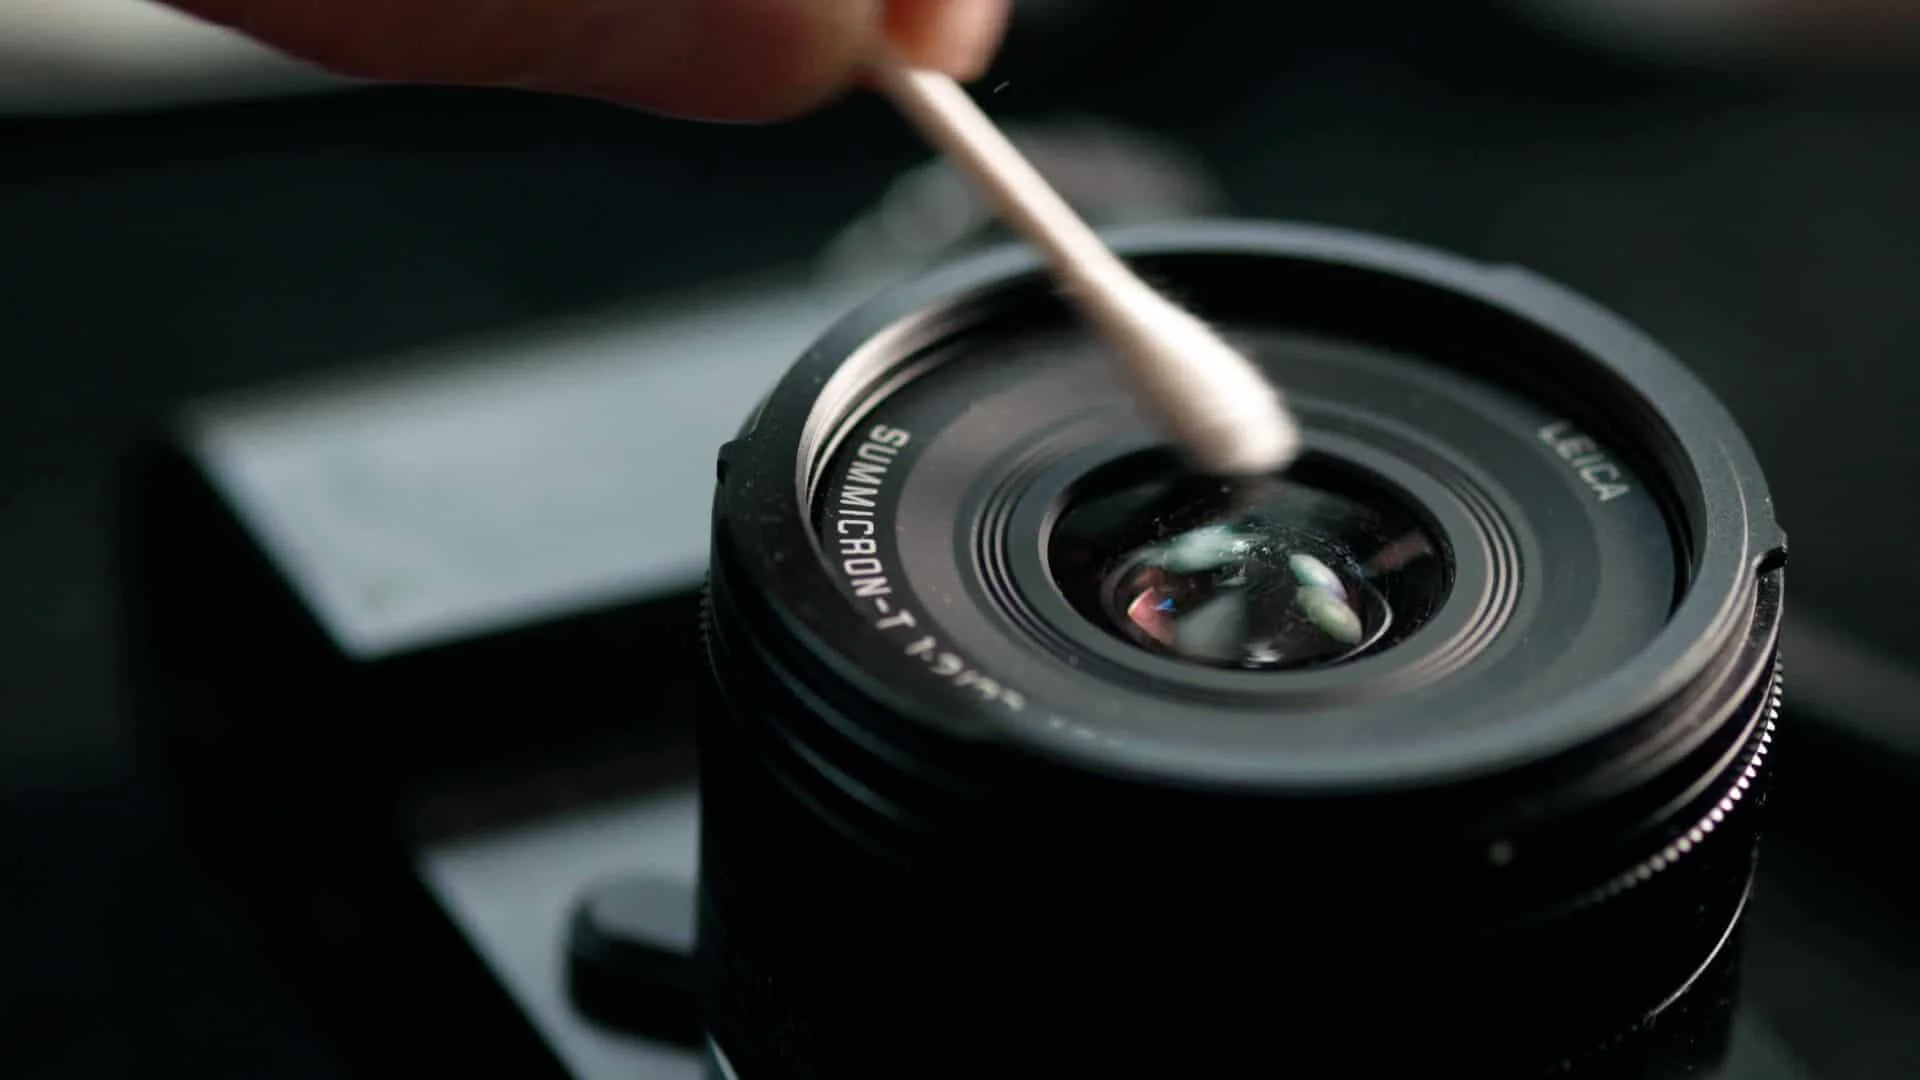 How to Clean a Camera Lens: The Do's and Don'ts